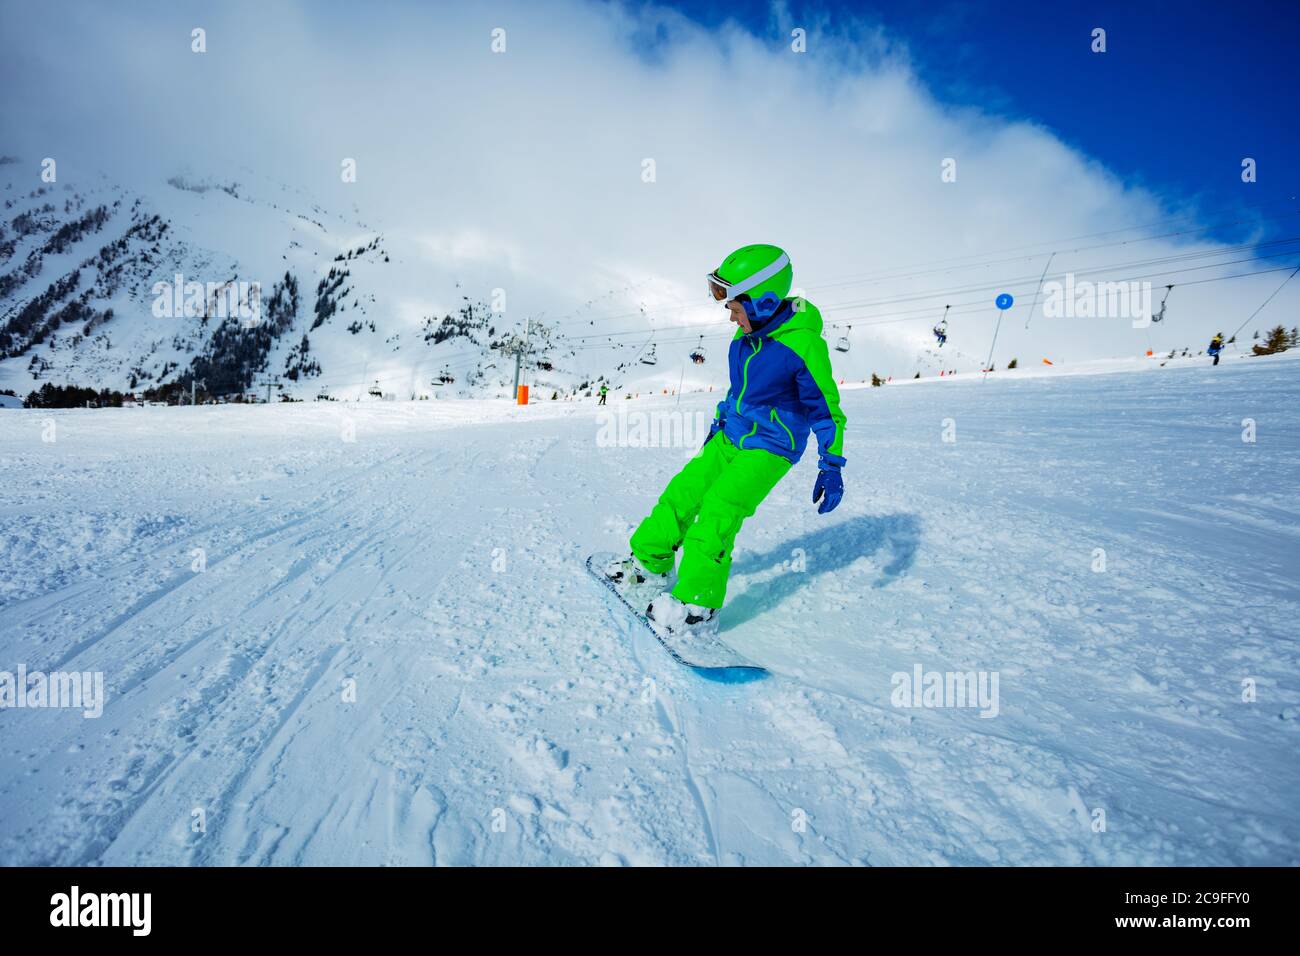 Skiers sliding down snowy slope on mountain at winter resort 11973079 Stock  Photo at Vecteezy